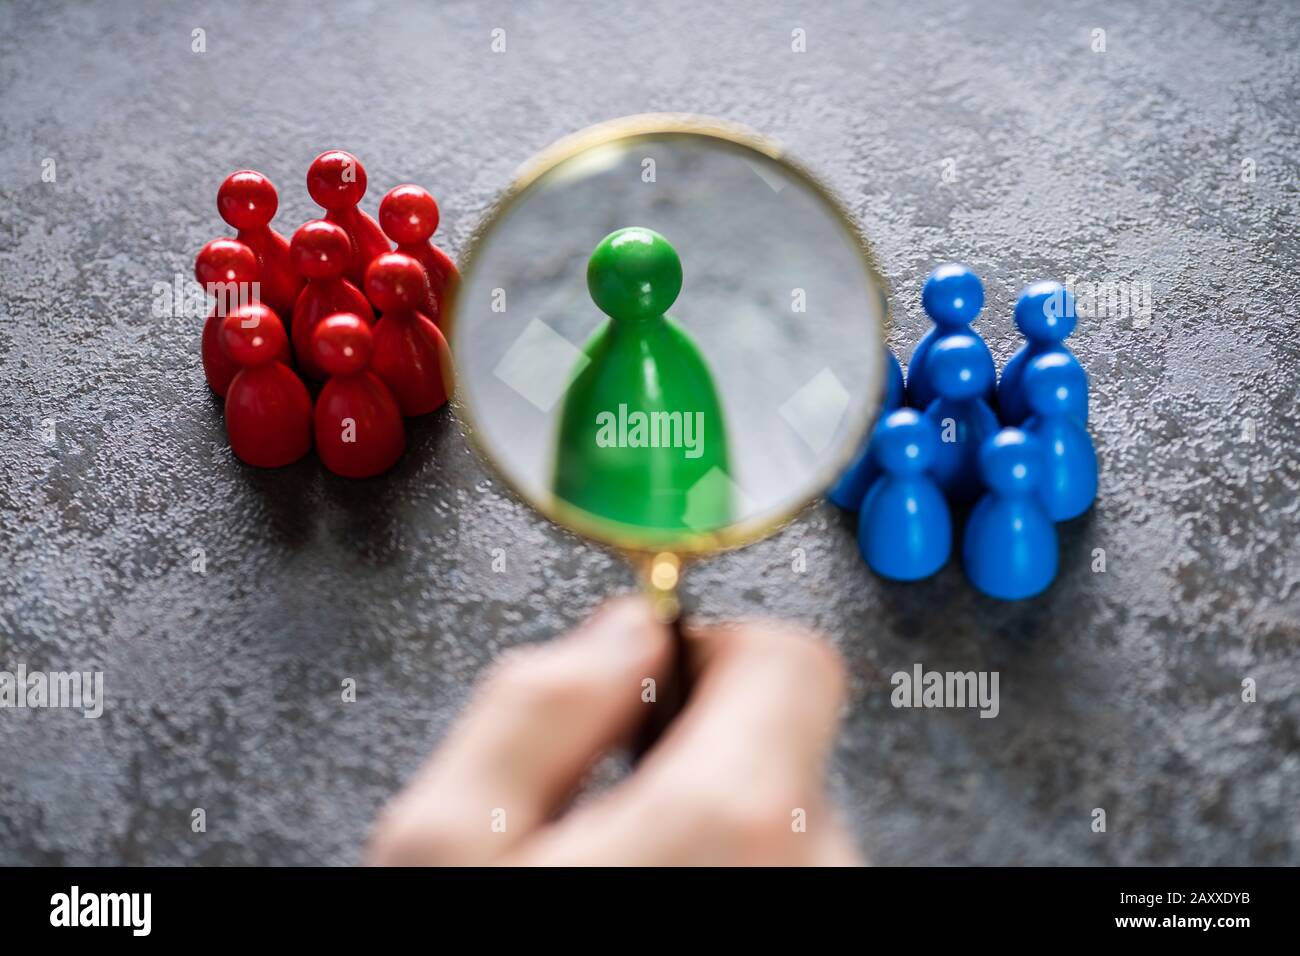 A Male Looking At Colorful Pawns With Magnifying Glass On The Desk Stock Photo